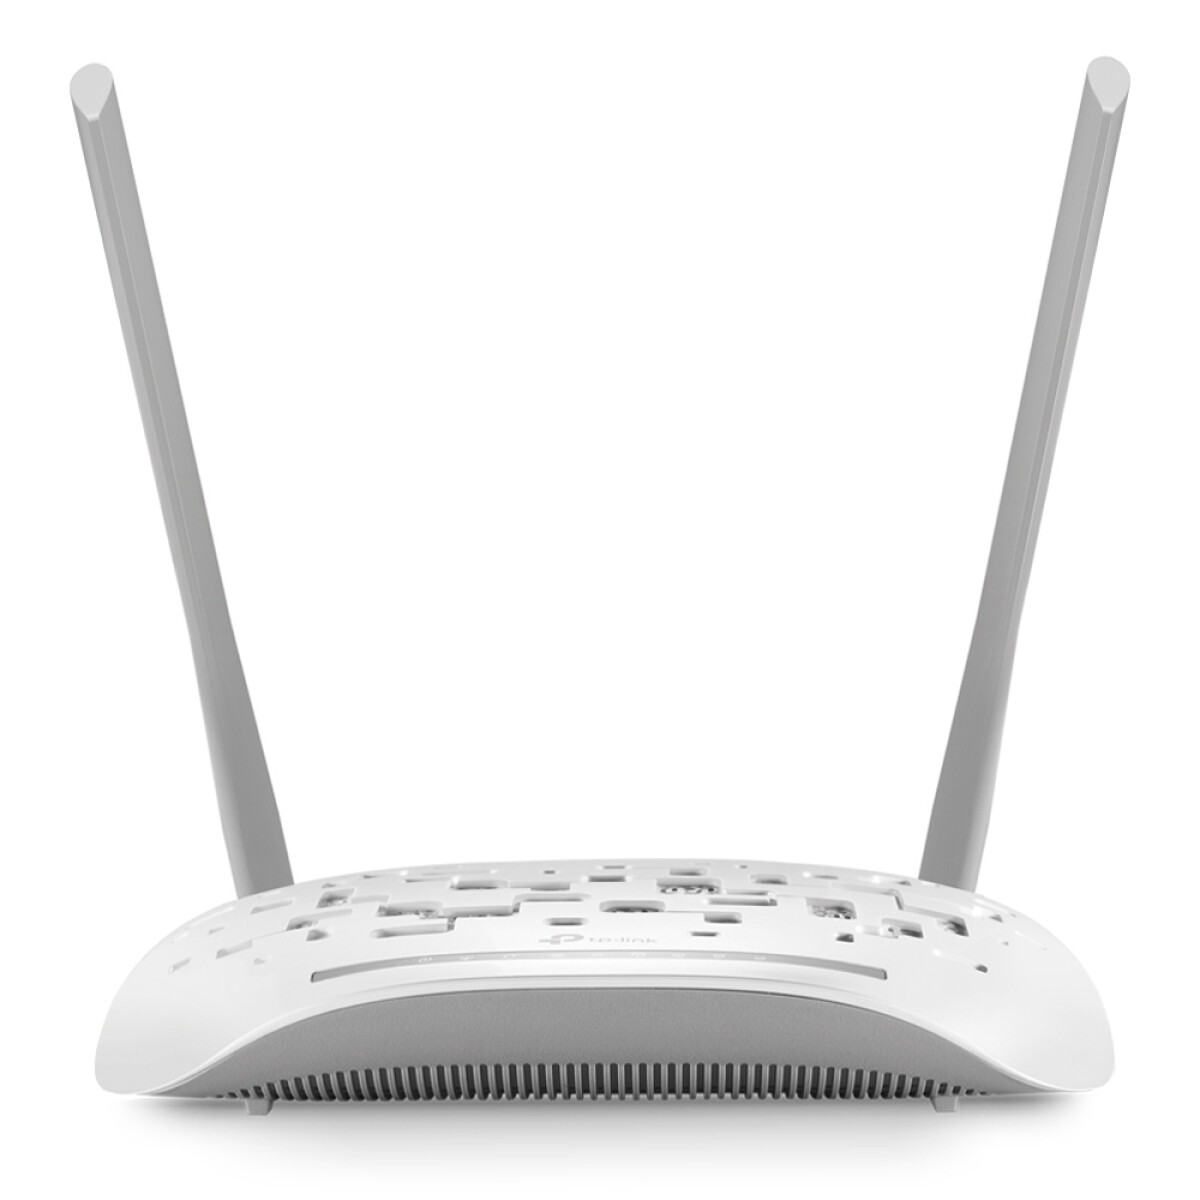 Router inalambrico adsl2+ tp-link td-w8961n 300mbps - Blanco 